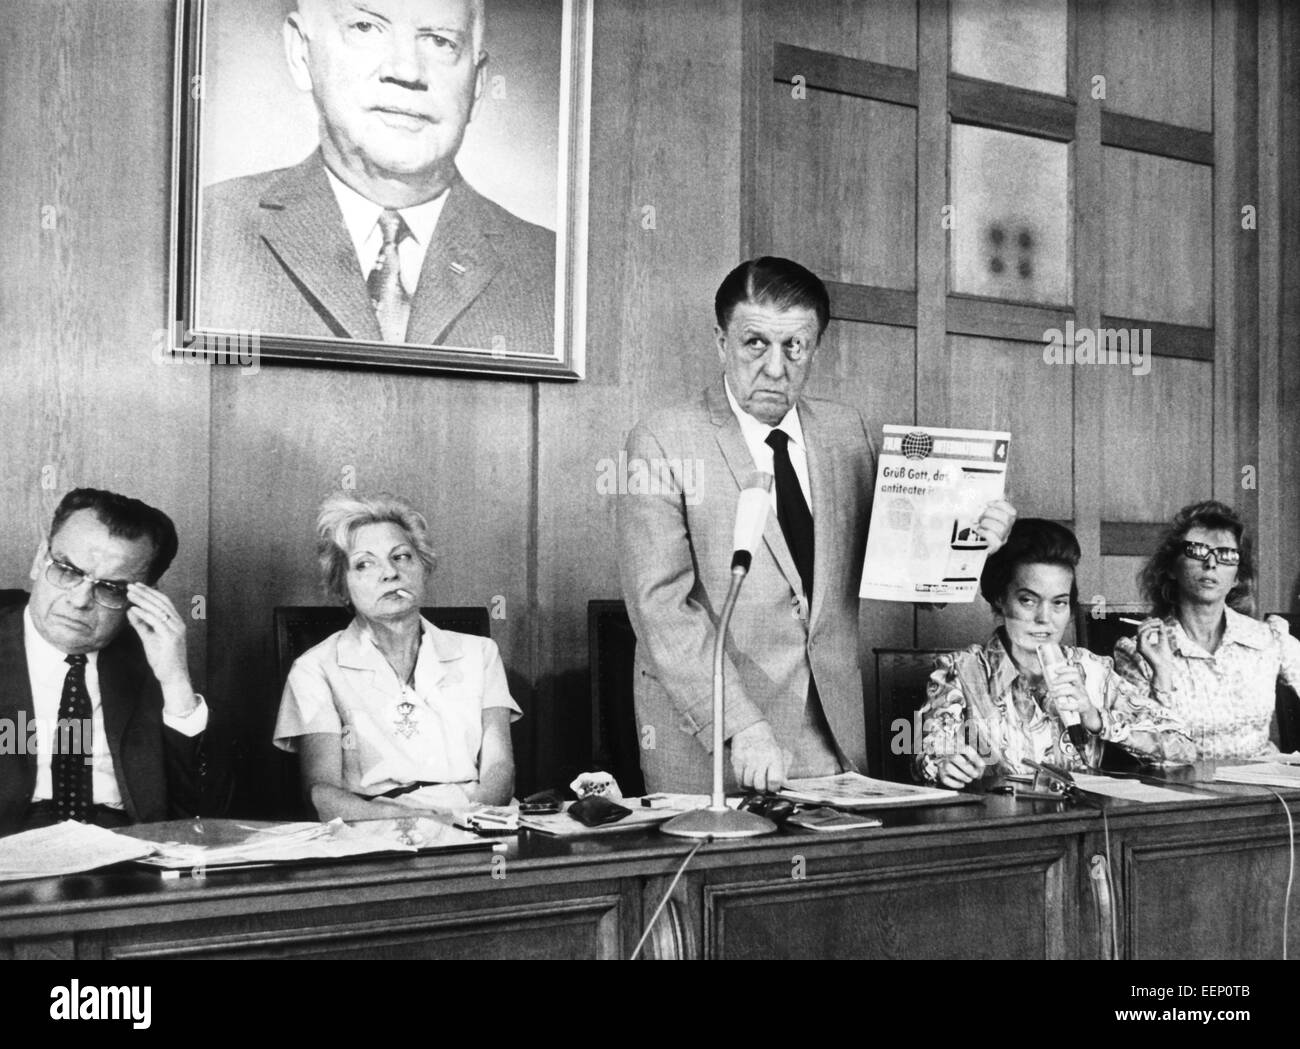 (L-r) Conductor of the International Film Festival Alfred Bauer, member of the jury Vera Volmane (France), president of the jury George Stevens (USA), a translator and member of the jury Billie Whitelaw (GB) during a press conference on the 5th of July in 1970 in Berlin. The jury stepped down from their office after heavy discussions. Stock Photo